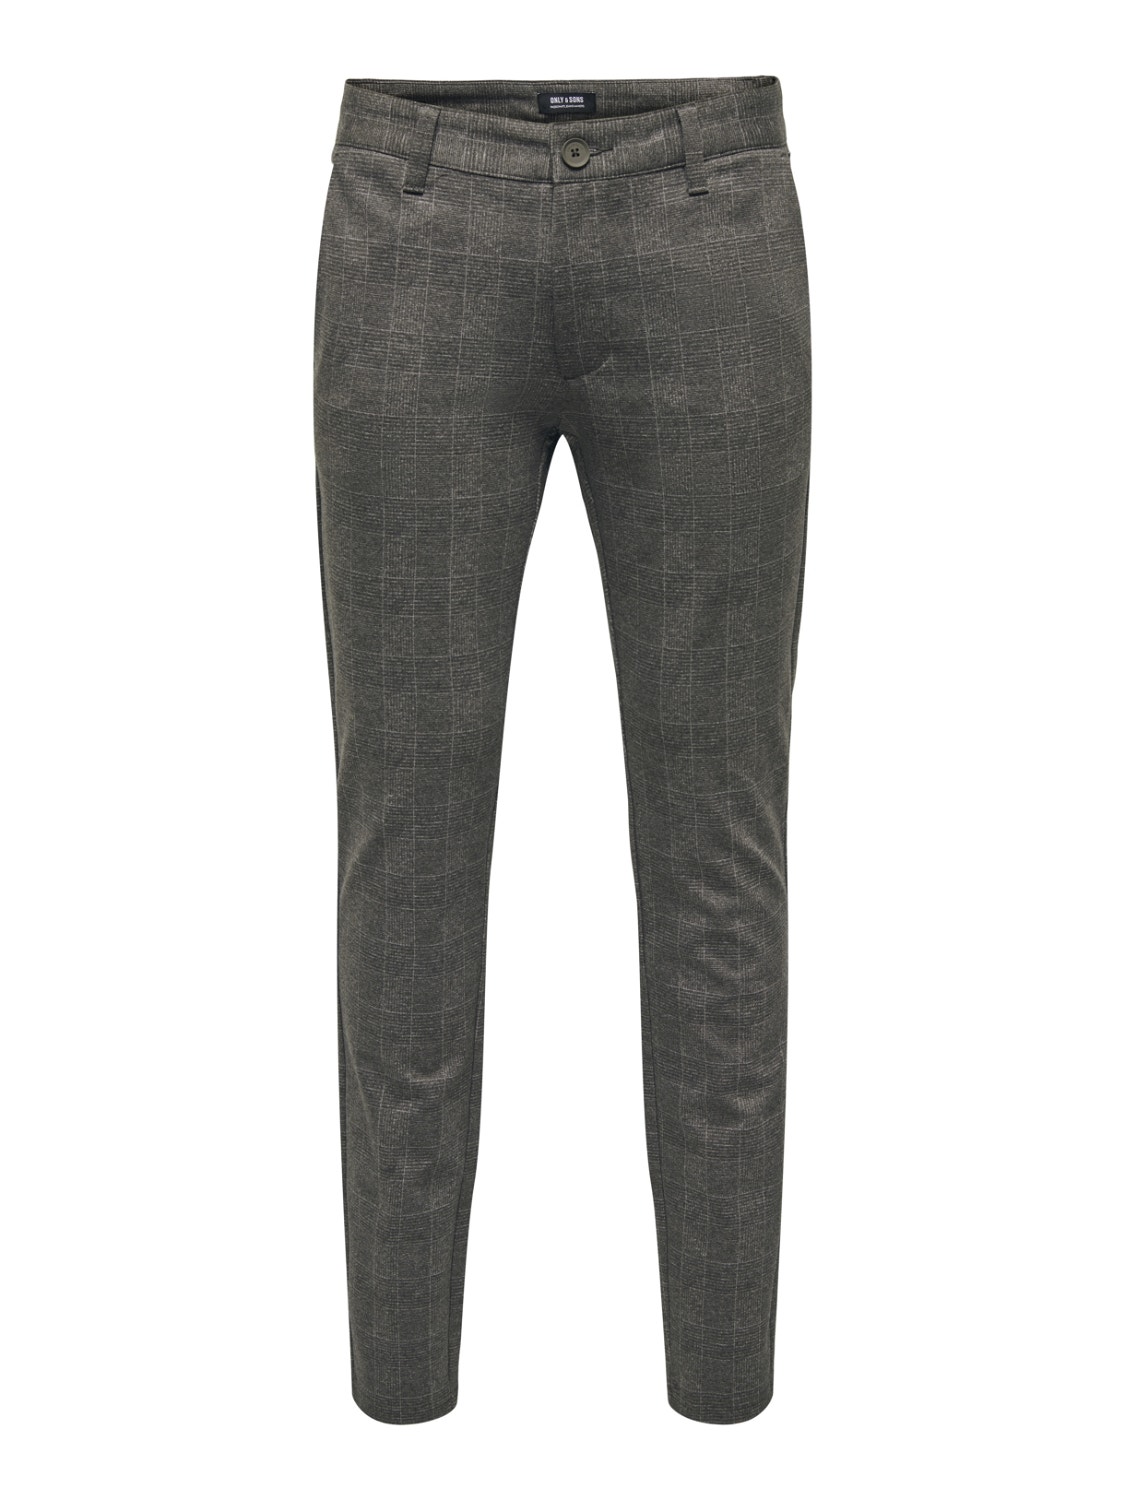 ONLY & SONS Slim Fit Mid waist Trousers -Slate Black - 22019887